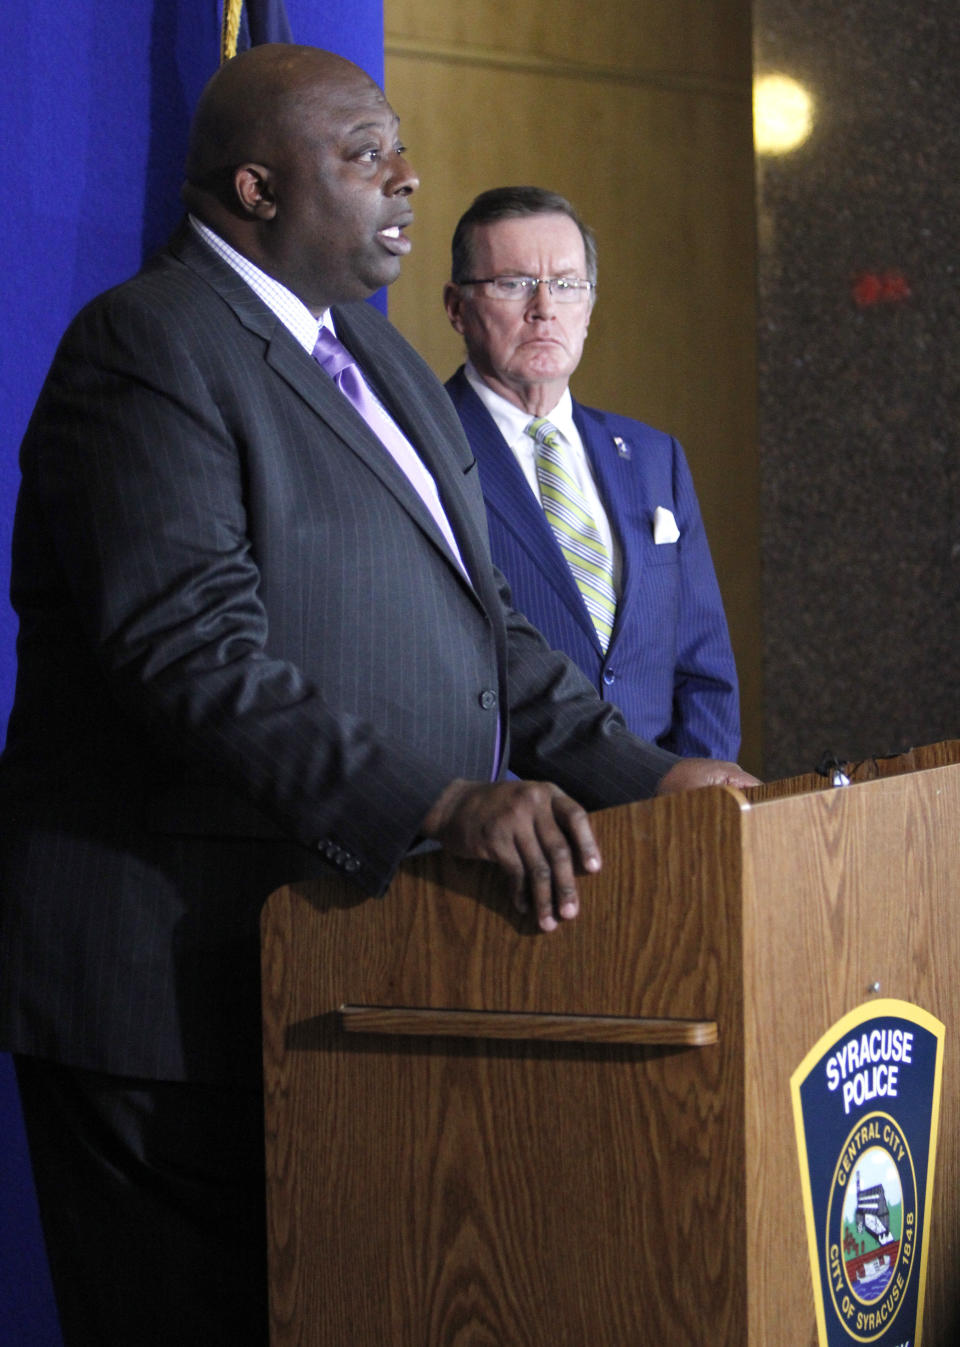 Syracuse Police Chief Kenton T. Buckner, left, and Onondaga County District Attorney William J. Fitzpatrick, right, attend a news conference at the Syracuse Police Department in Syracuse, N.Y., Thursday, Feb. 21, 2019, about Syracuse men's NCAA college basketball head coach Jim Boeheim's involvement in a fatal car accident where he struck and killed a man standing along an interstate in Syracuse. Boeheim struck and killed a man along an interstate late Wednesday night as he tried to avoid hitting the man's disabled vehicle, police say. (AP Photo/Nick Lisi)